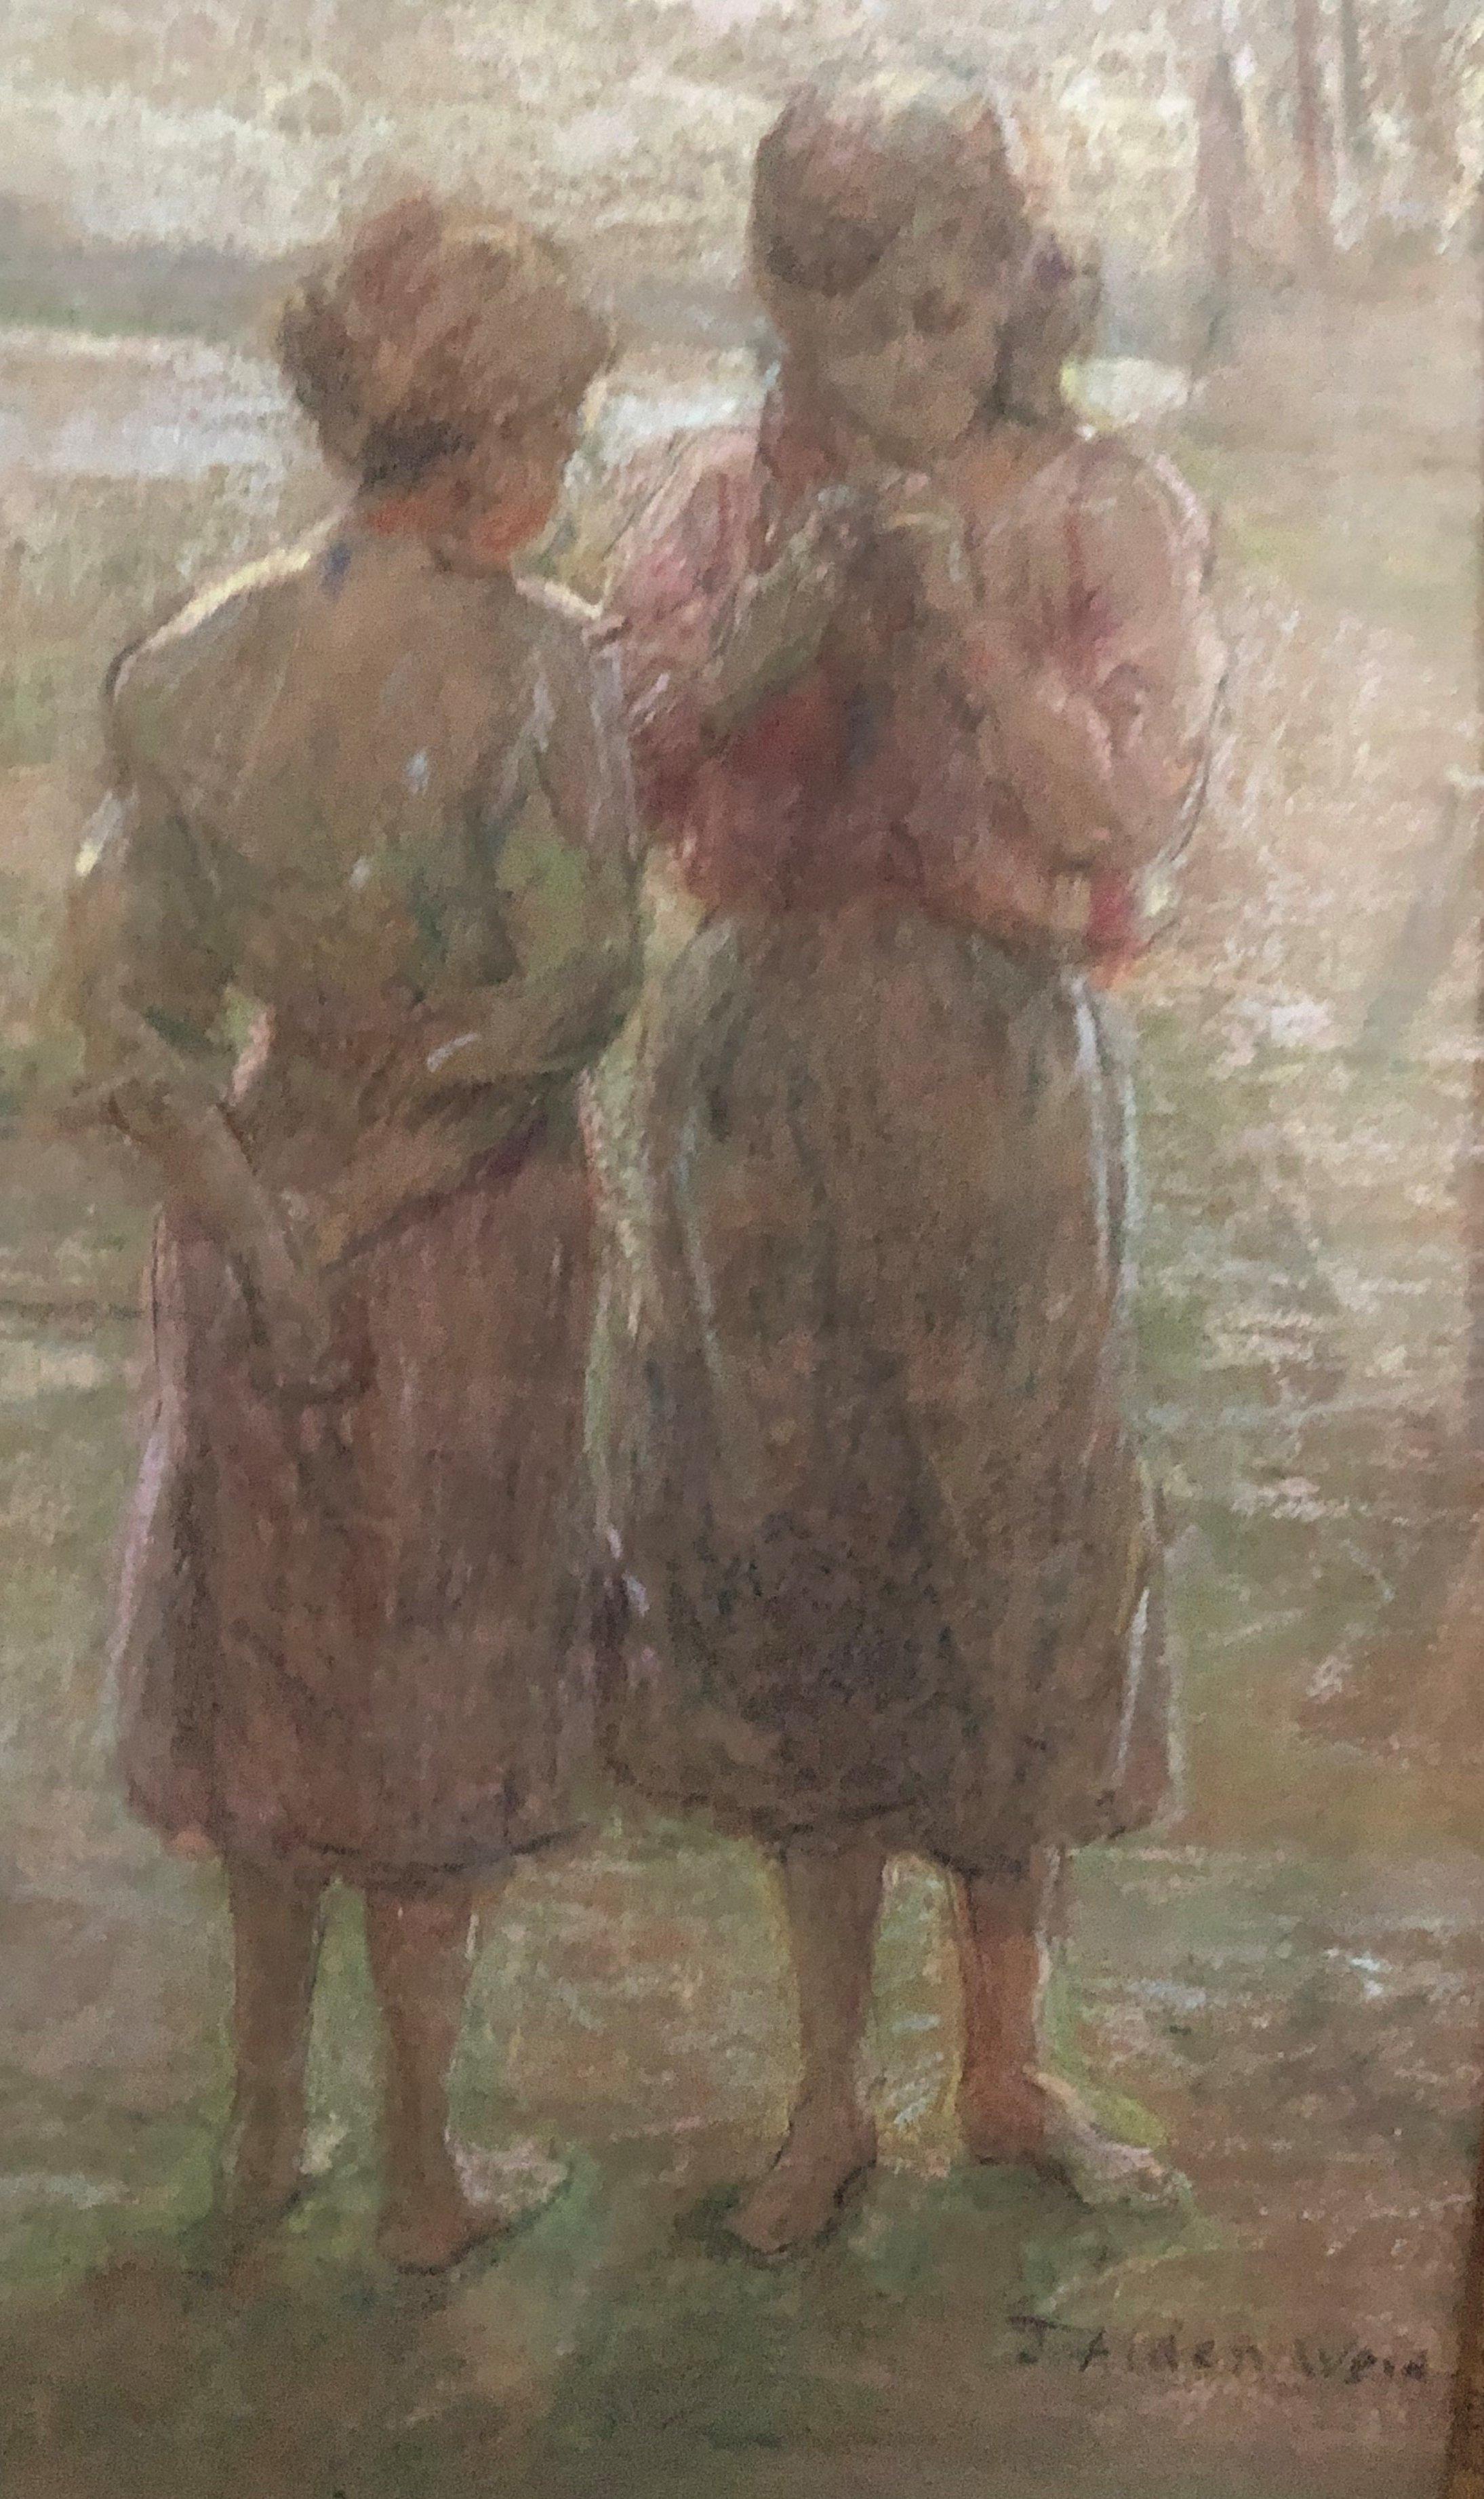 Julian Alden Weir (1852 - 1919)
Two Girls at the Beach (Possibly his Daughters, Dorothy and Cora Weir), circa 1905
Pastel on paper
14 1/2 x 13 1/2 inches
Signed lower right

Provenance:
Meredith Long Gallery, Houston, Texas, circa 1970
Estate of